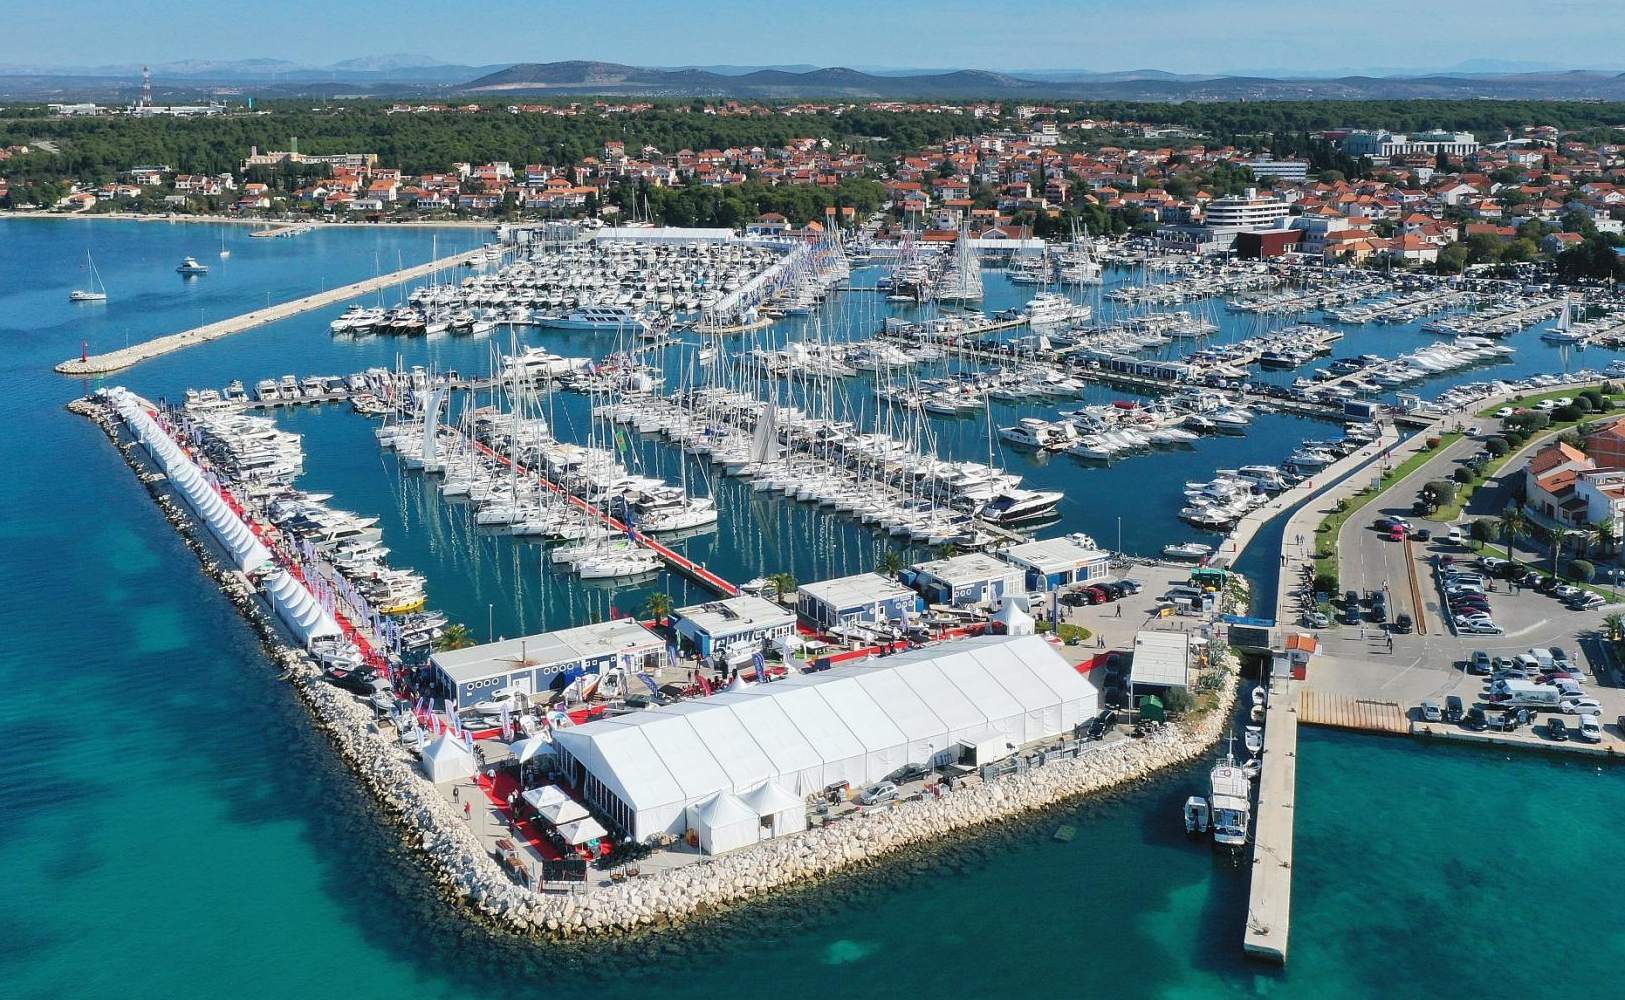 17.-20.10.2019. Biograd Boat Show is upon us!